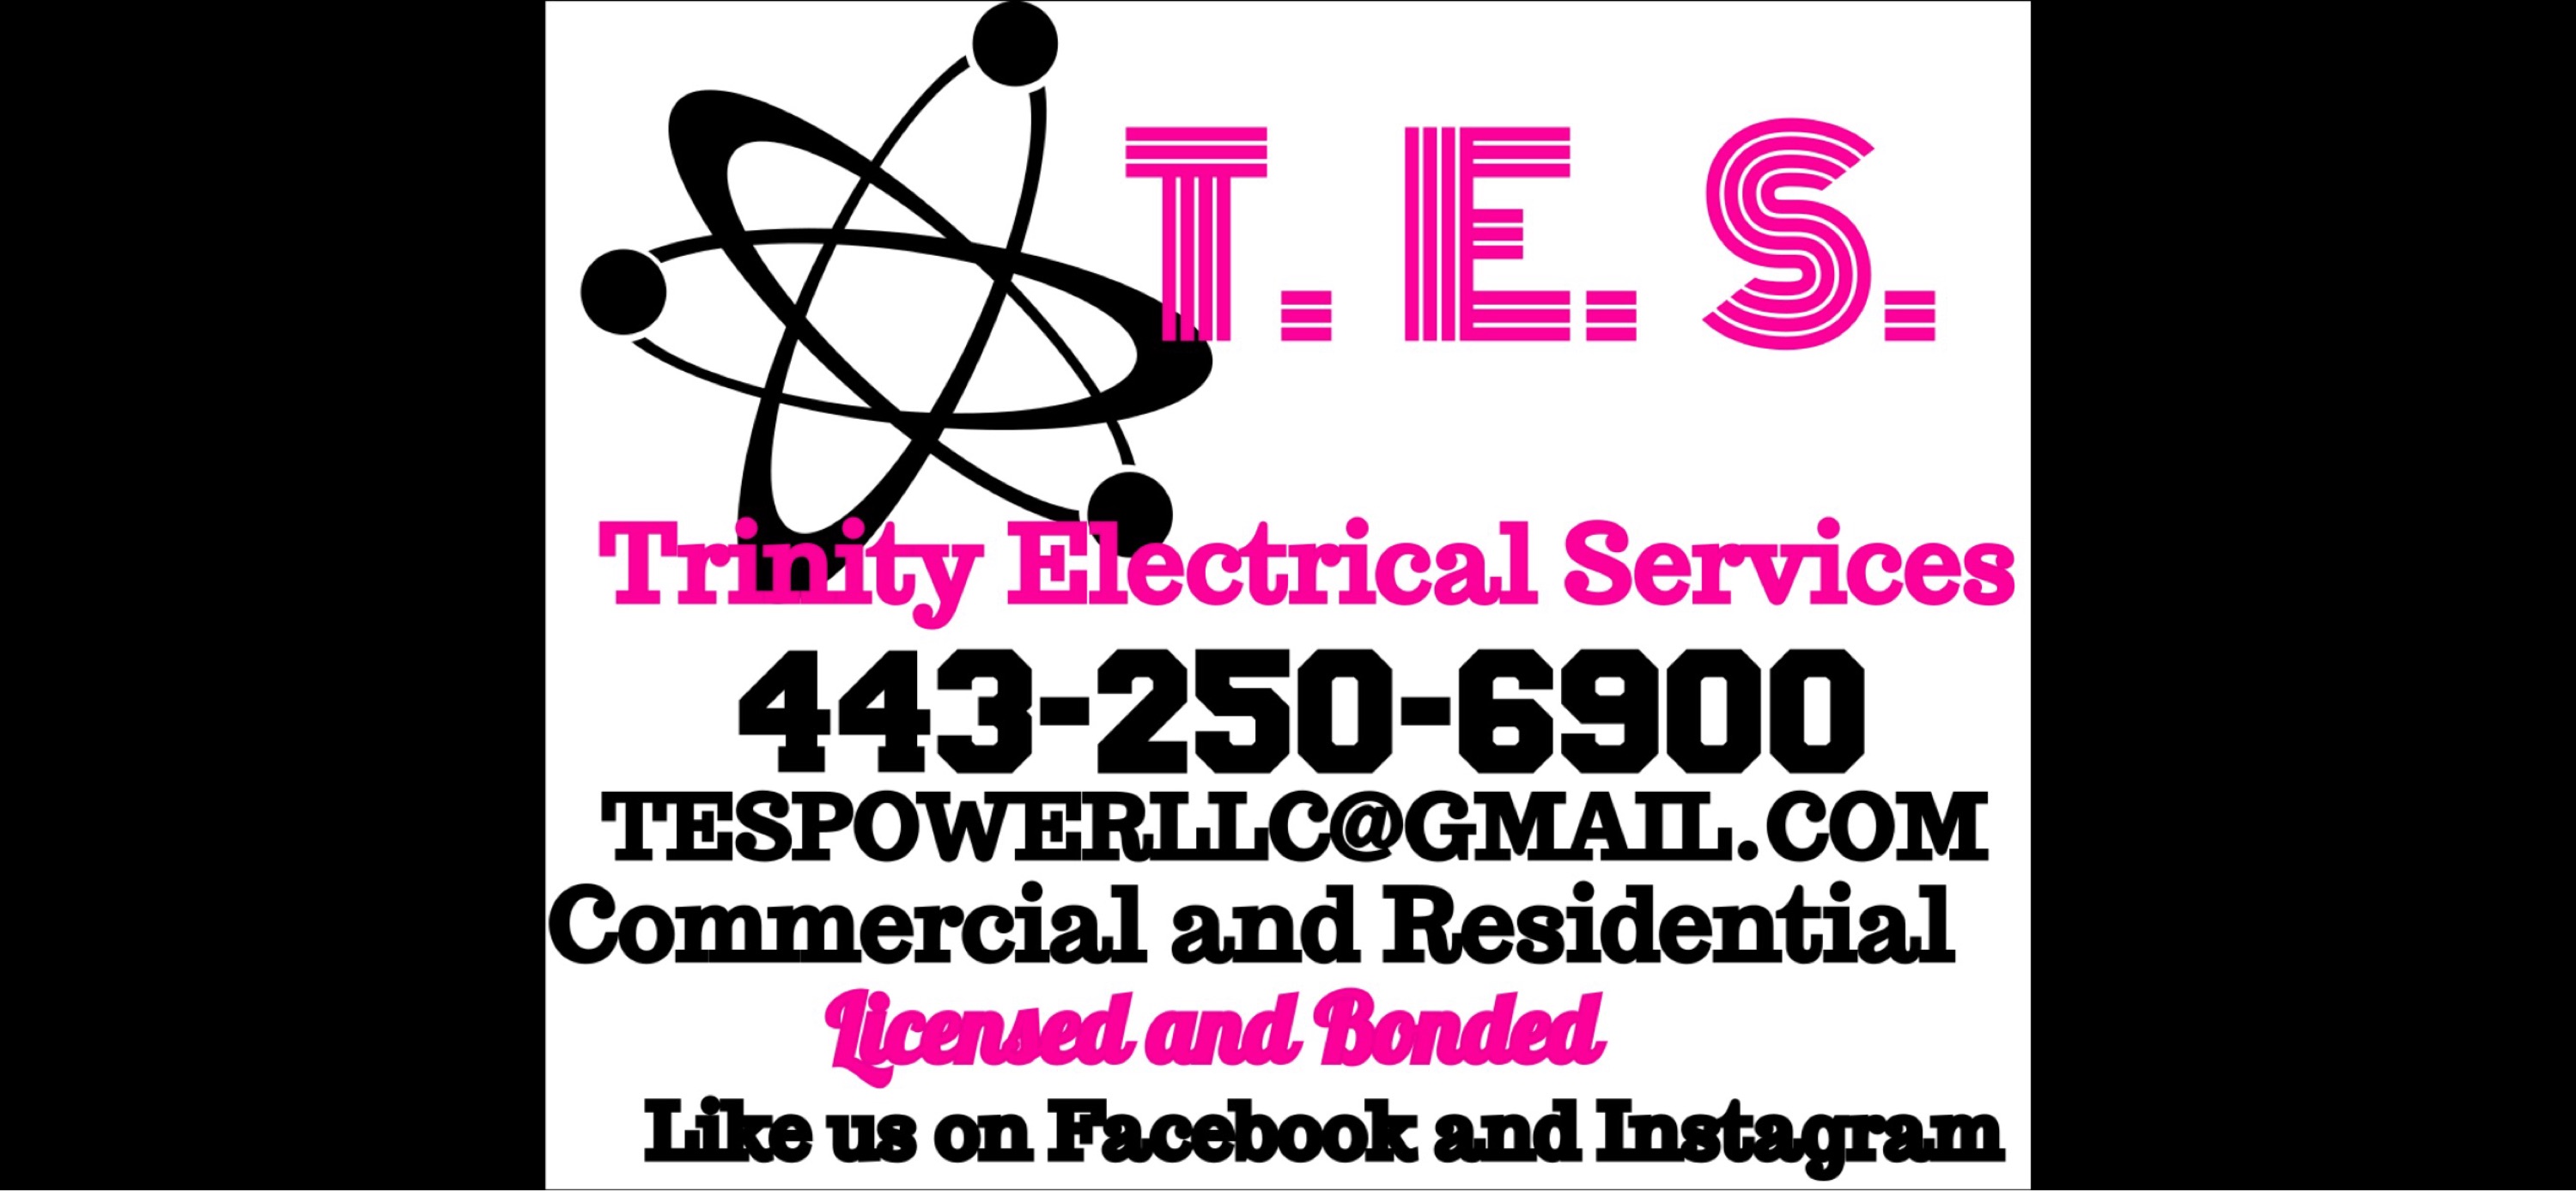 Trinity Electrical Services Logo